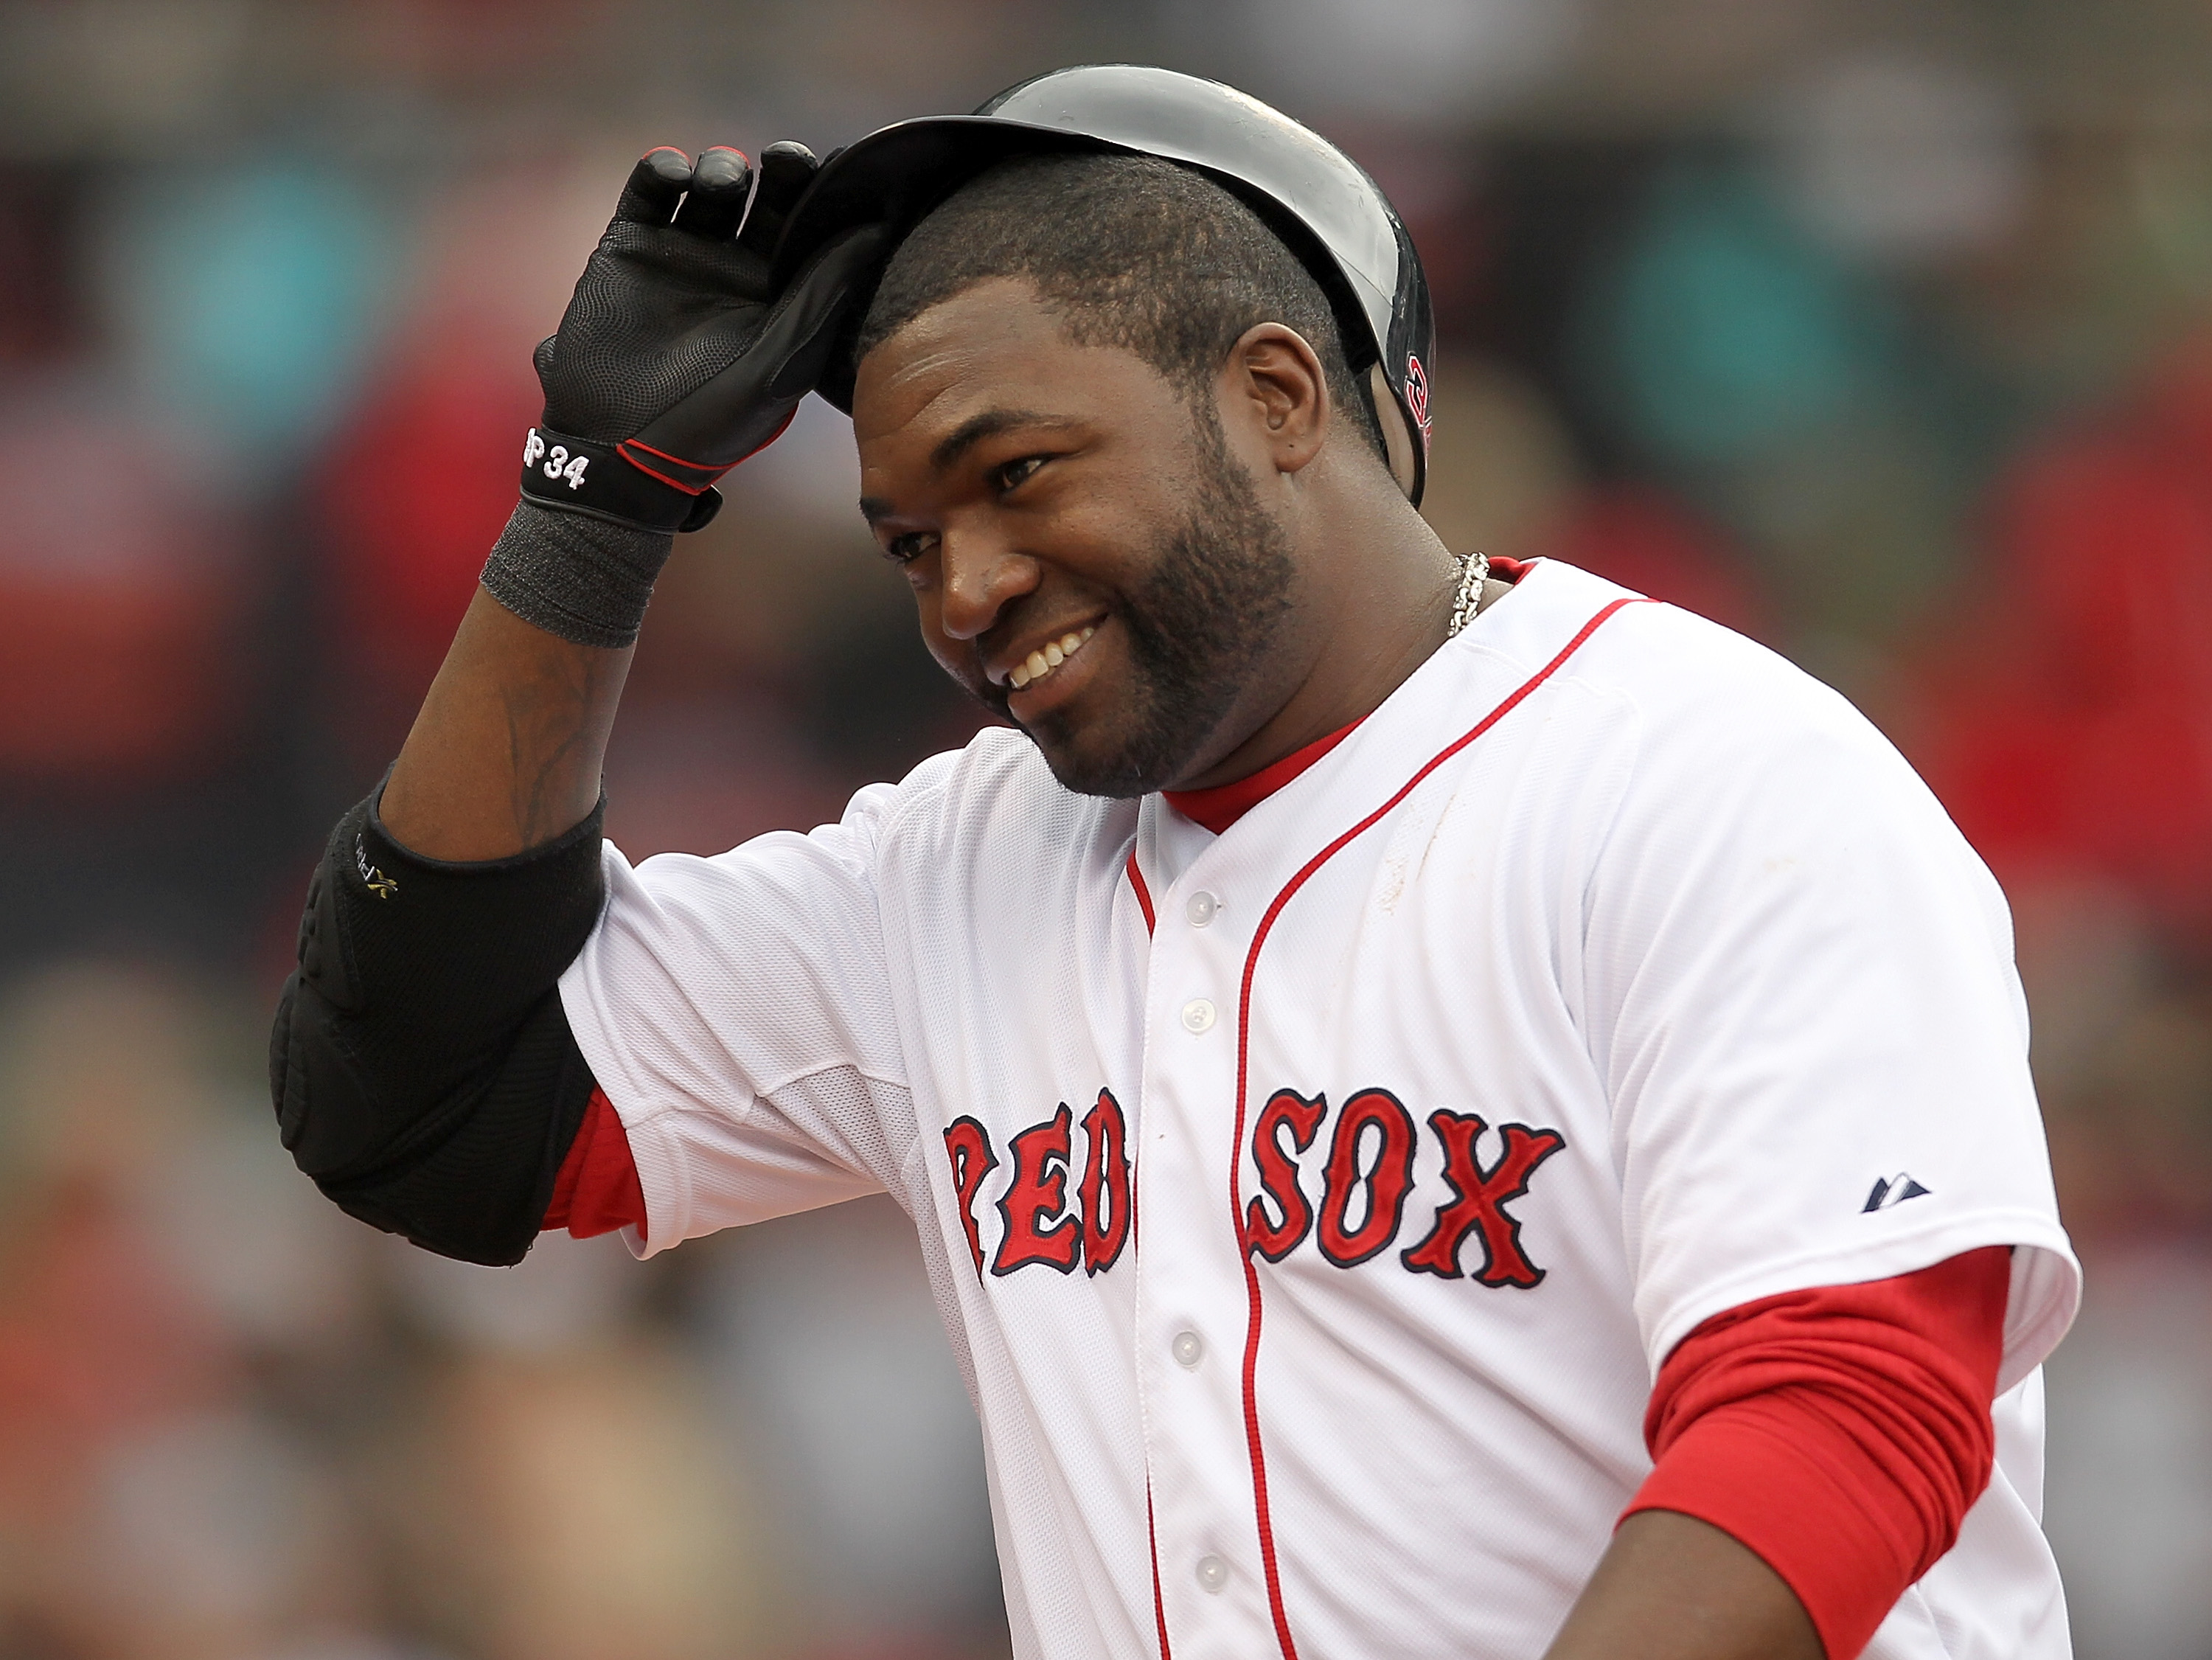 BOSTON, MA - APRIL 16, 2011:  David Ortiz #34 of the Boston Red Sox reacts in the seventh inning against the Toronto Blue Jays at Fenway Park April 16, 2011 in Boston, Massachusetts. (Photo by Jim Rogash/Getty Images)